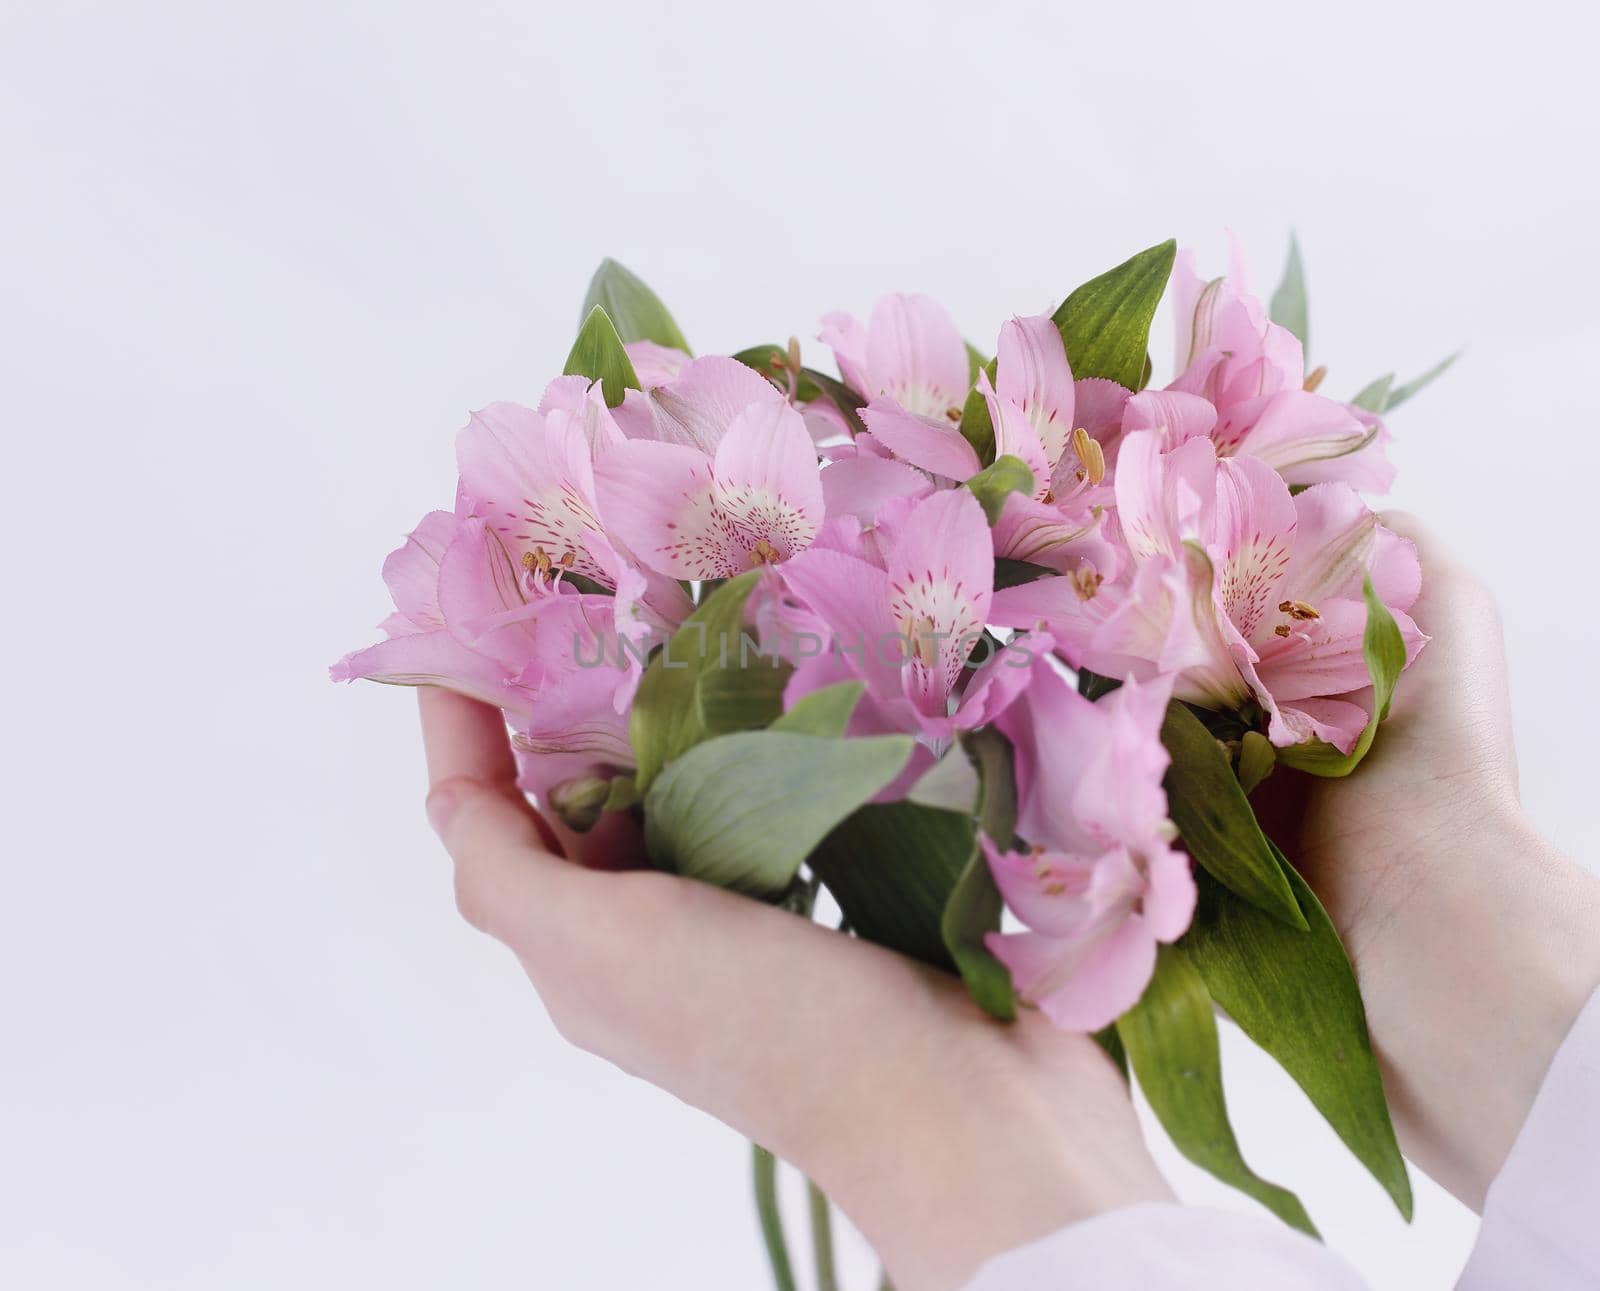 bouquet of flowers in female hands isolated on a light background.photo with copy space